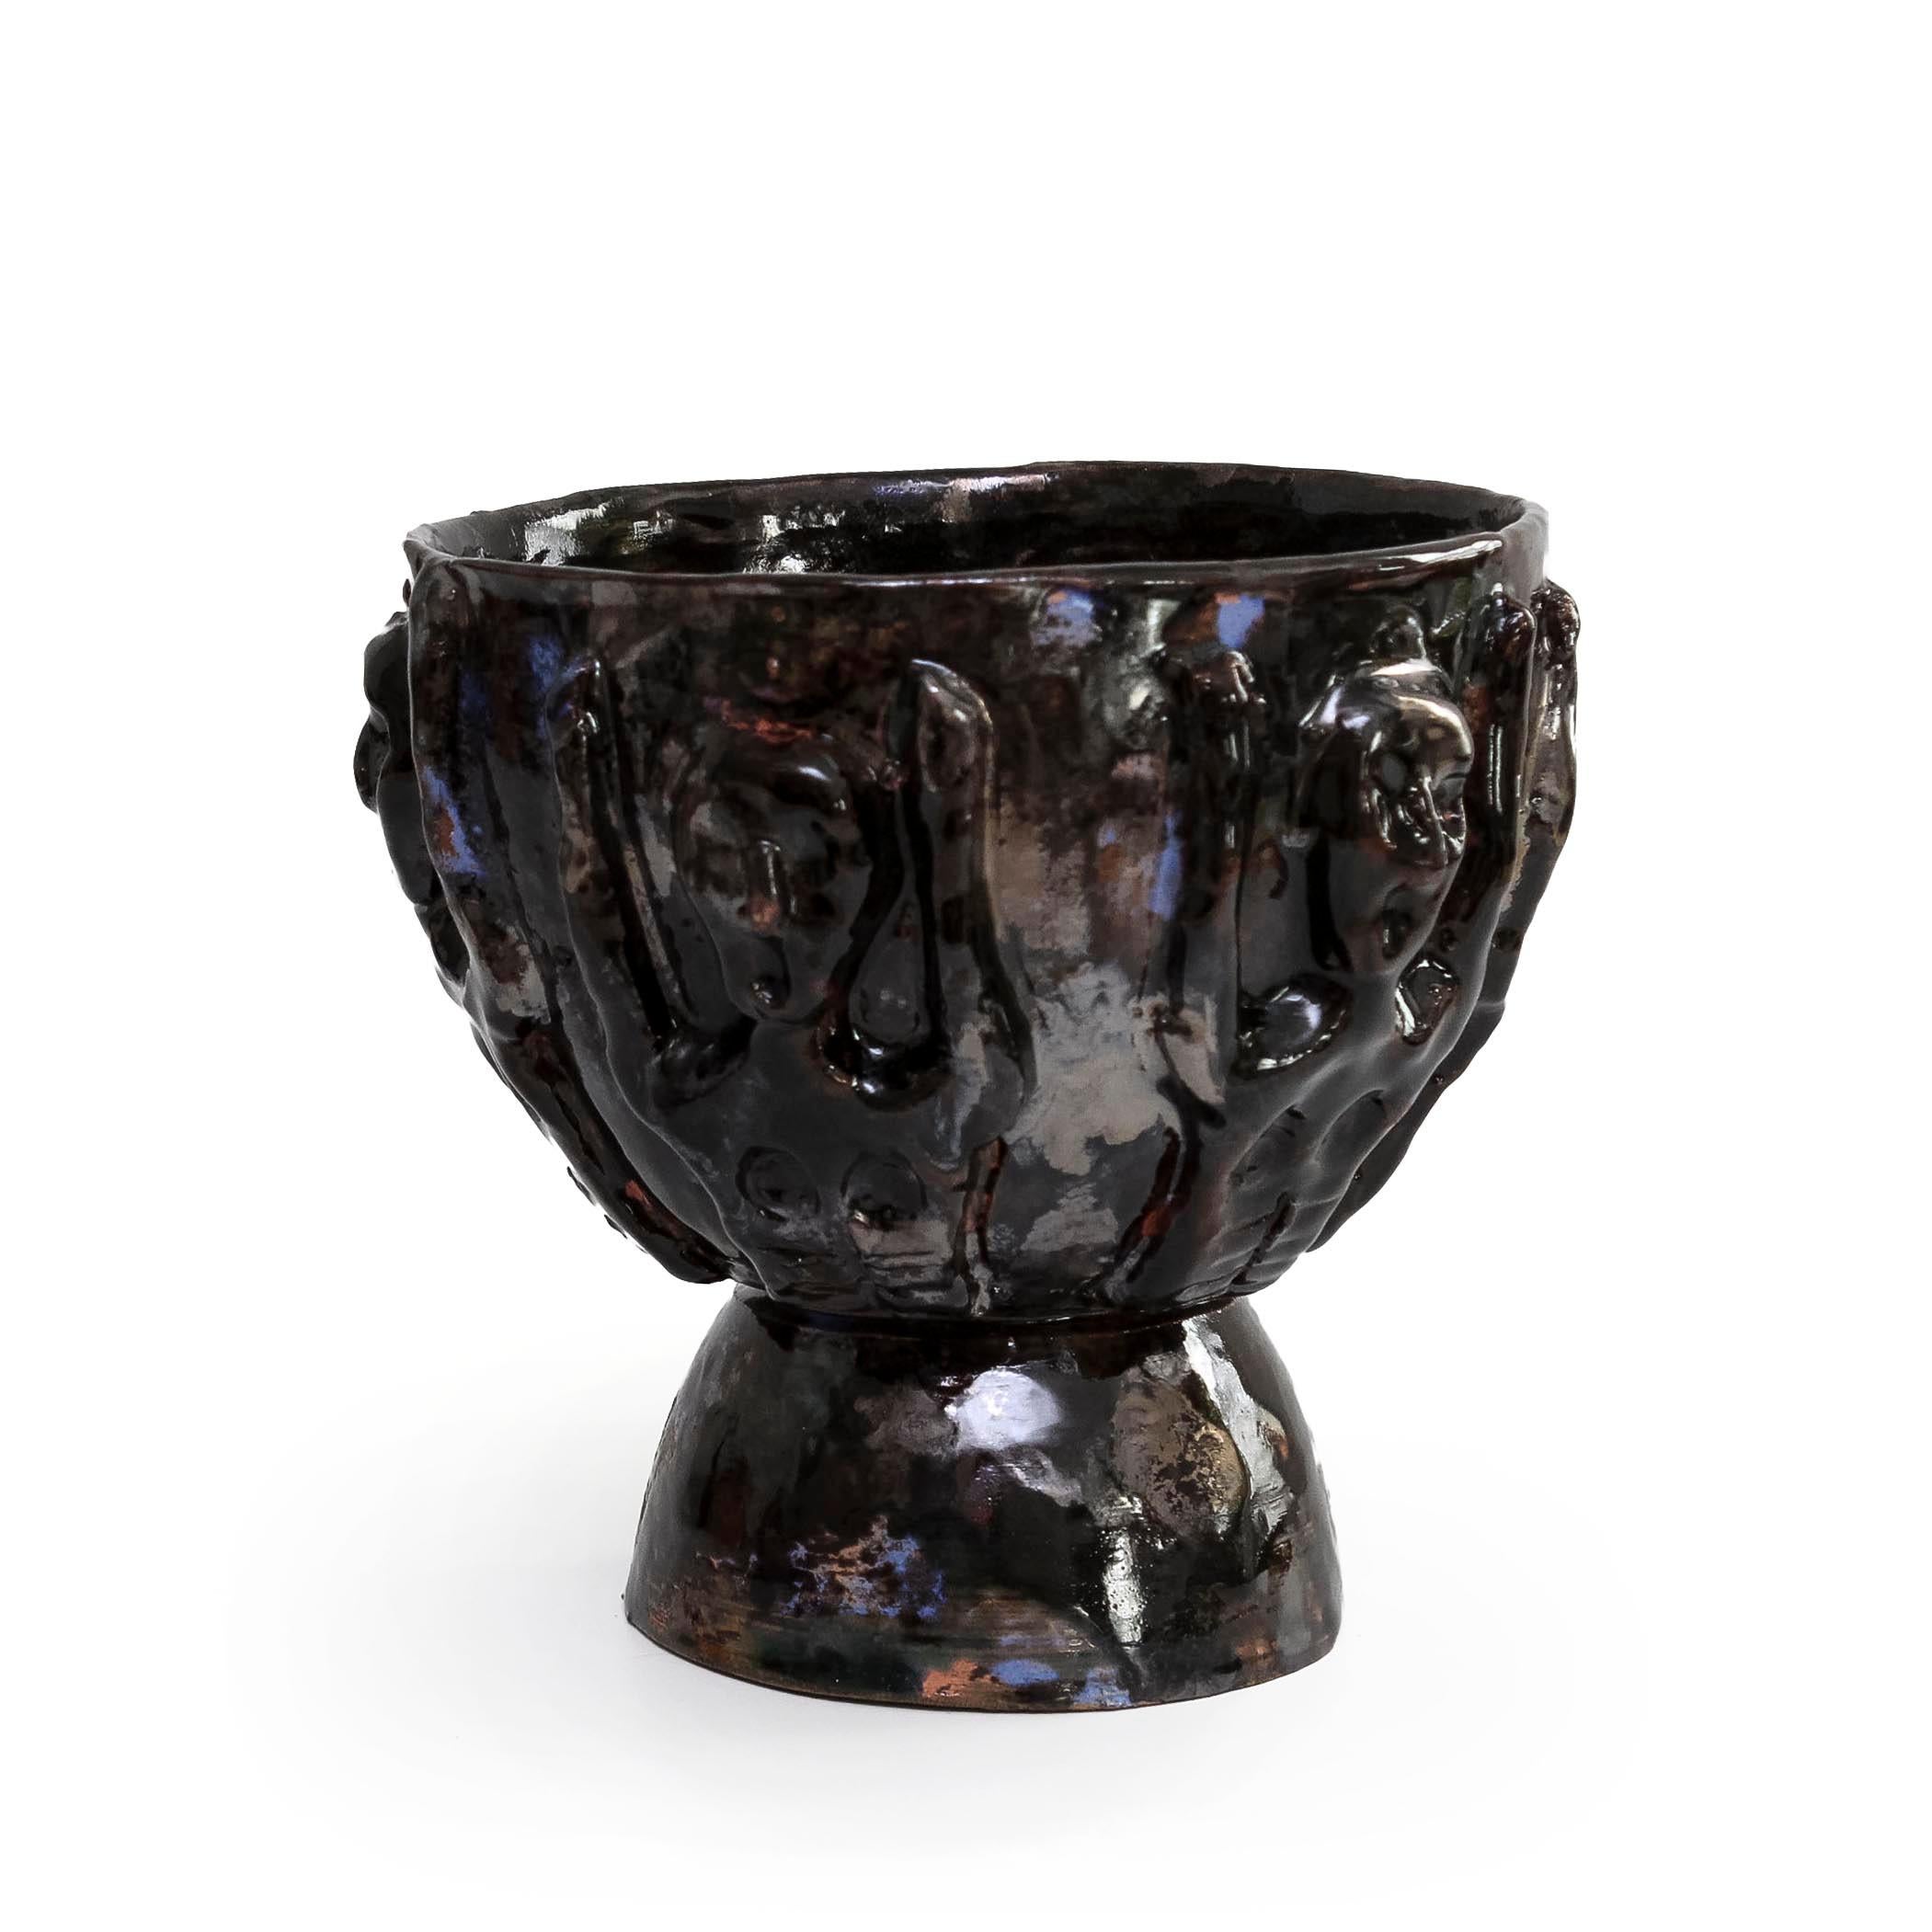 A rare and beautiful vase by Beato! Beatrice Wood,
It is signed.
Beatrice Wood (American, 1893–1998) was a painter, draughtsman, and sculptor best known for her luster-glazed ceramic works. Born in New York to a well-to-do family, Wood studied